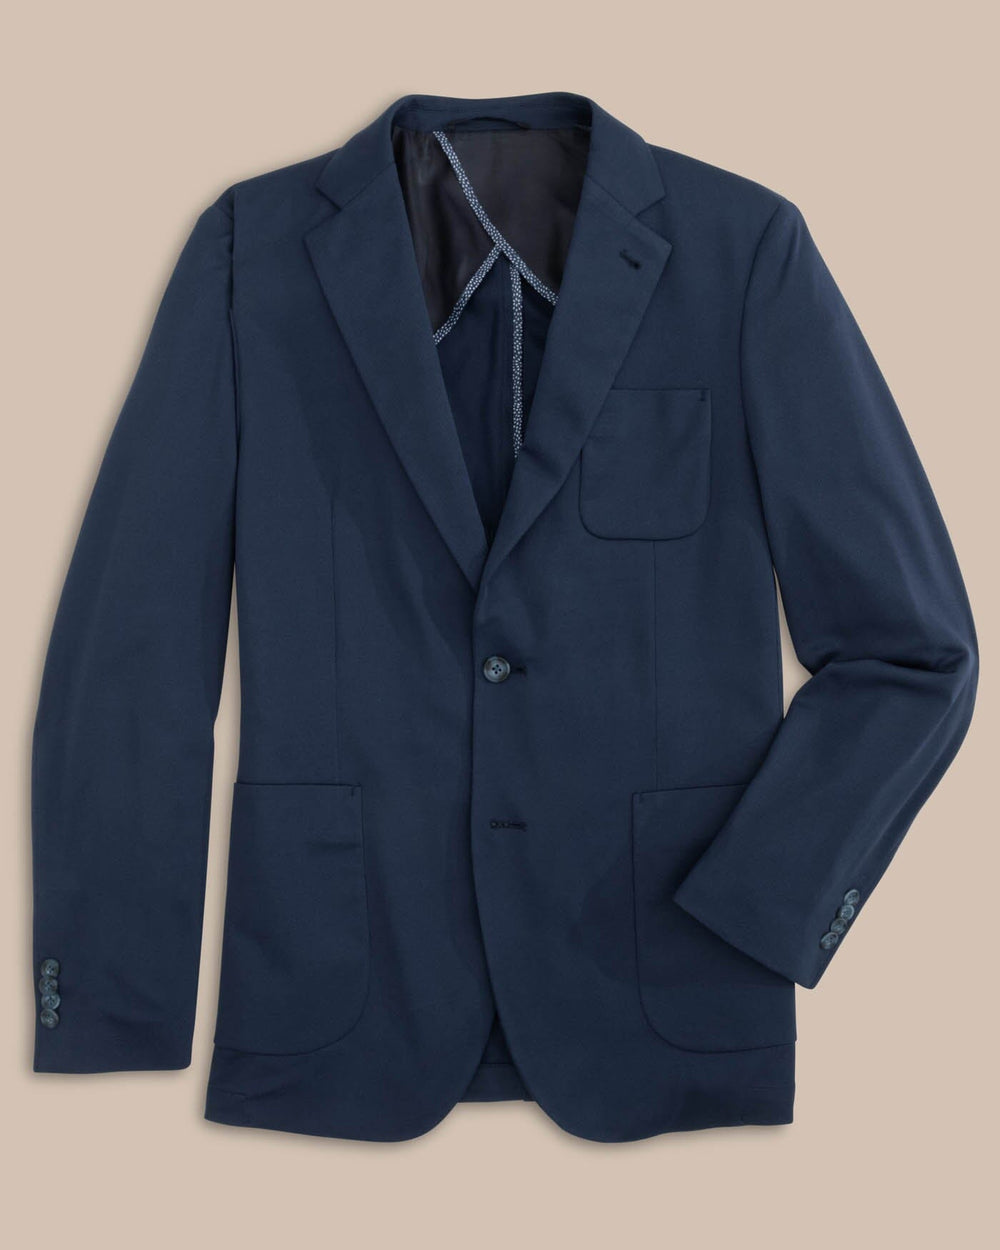 The front of the Men's Charleston Navy Blazer by Southern Tide - Navy